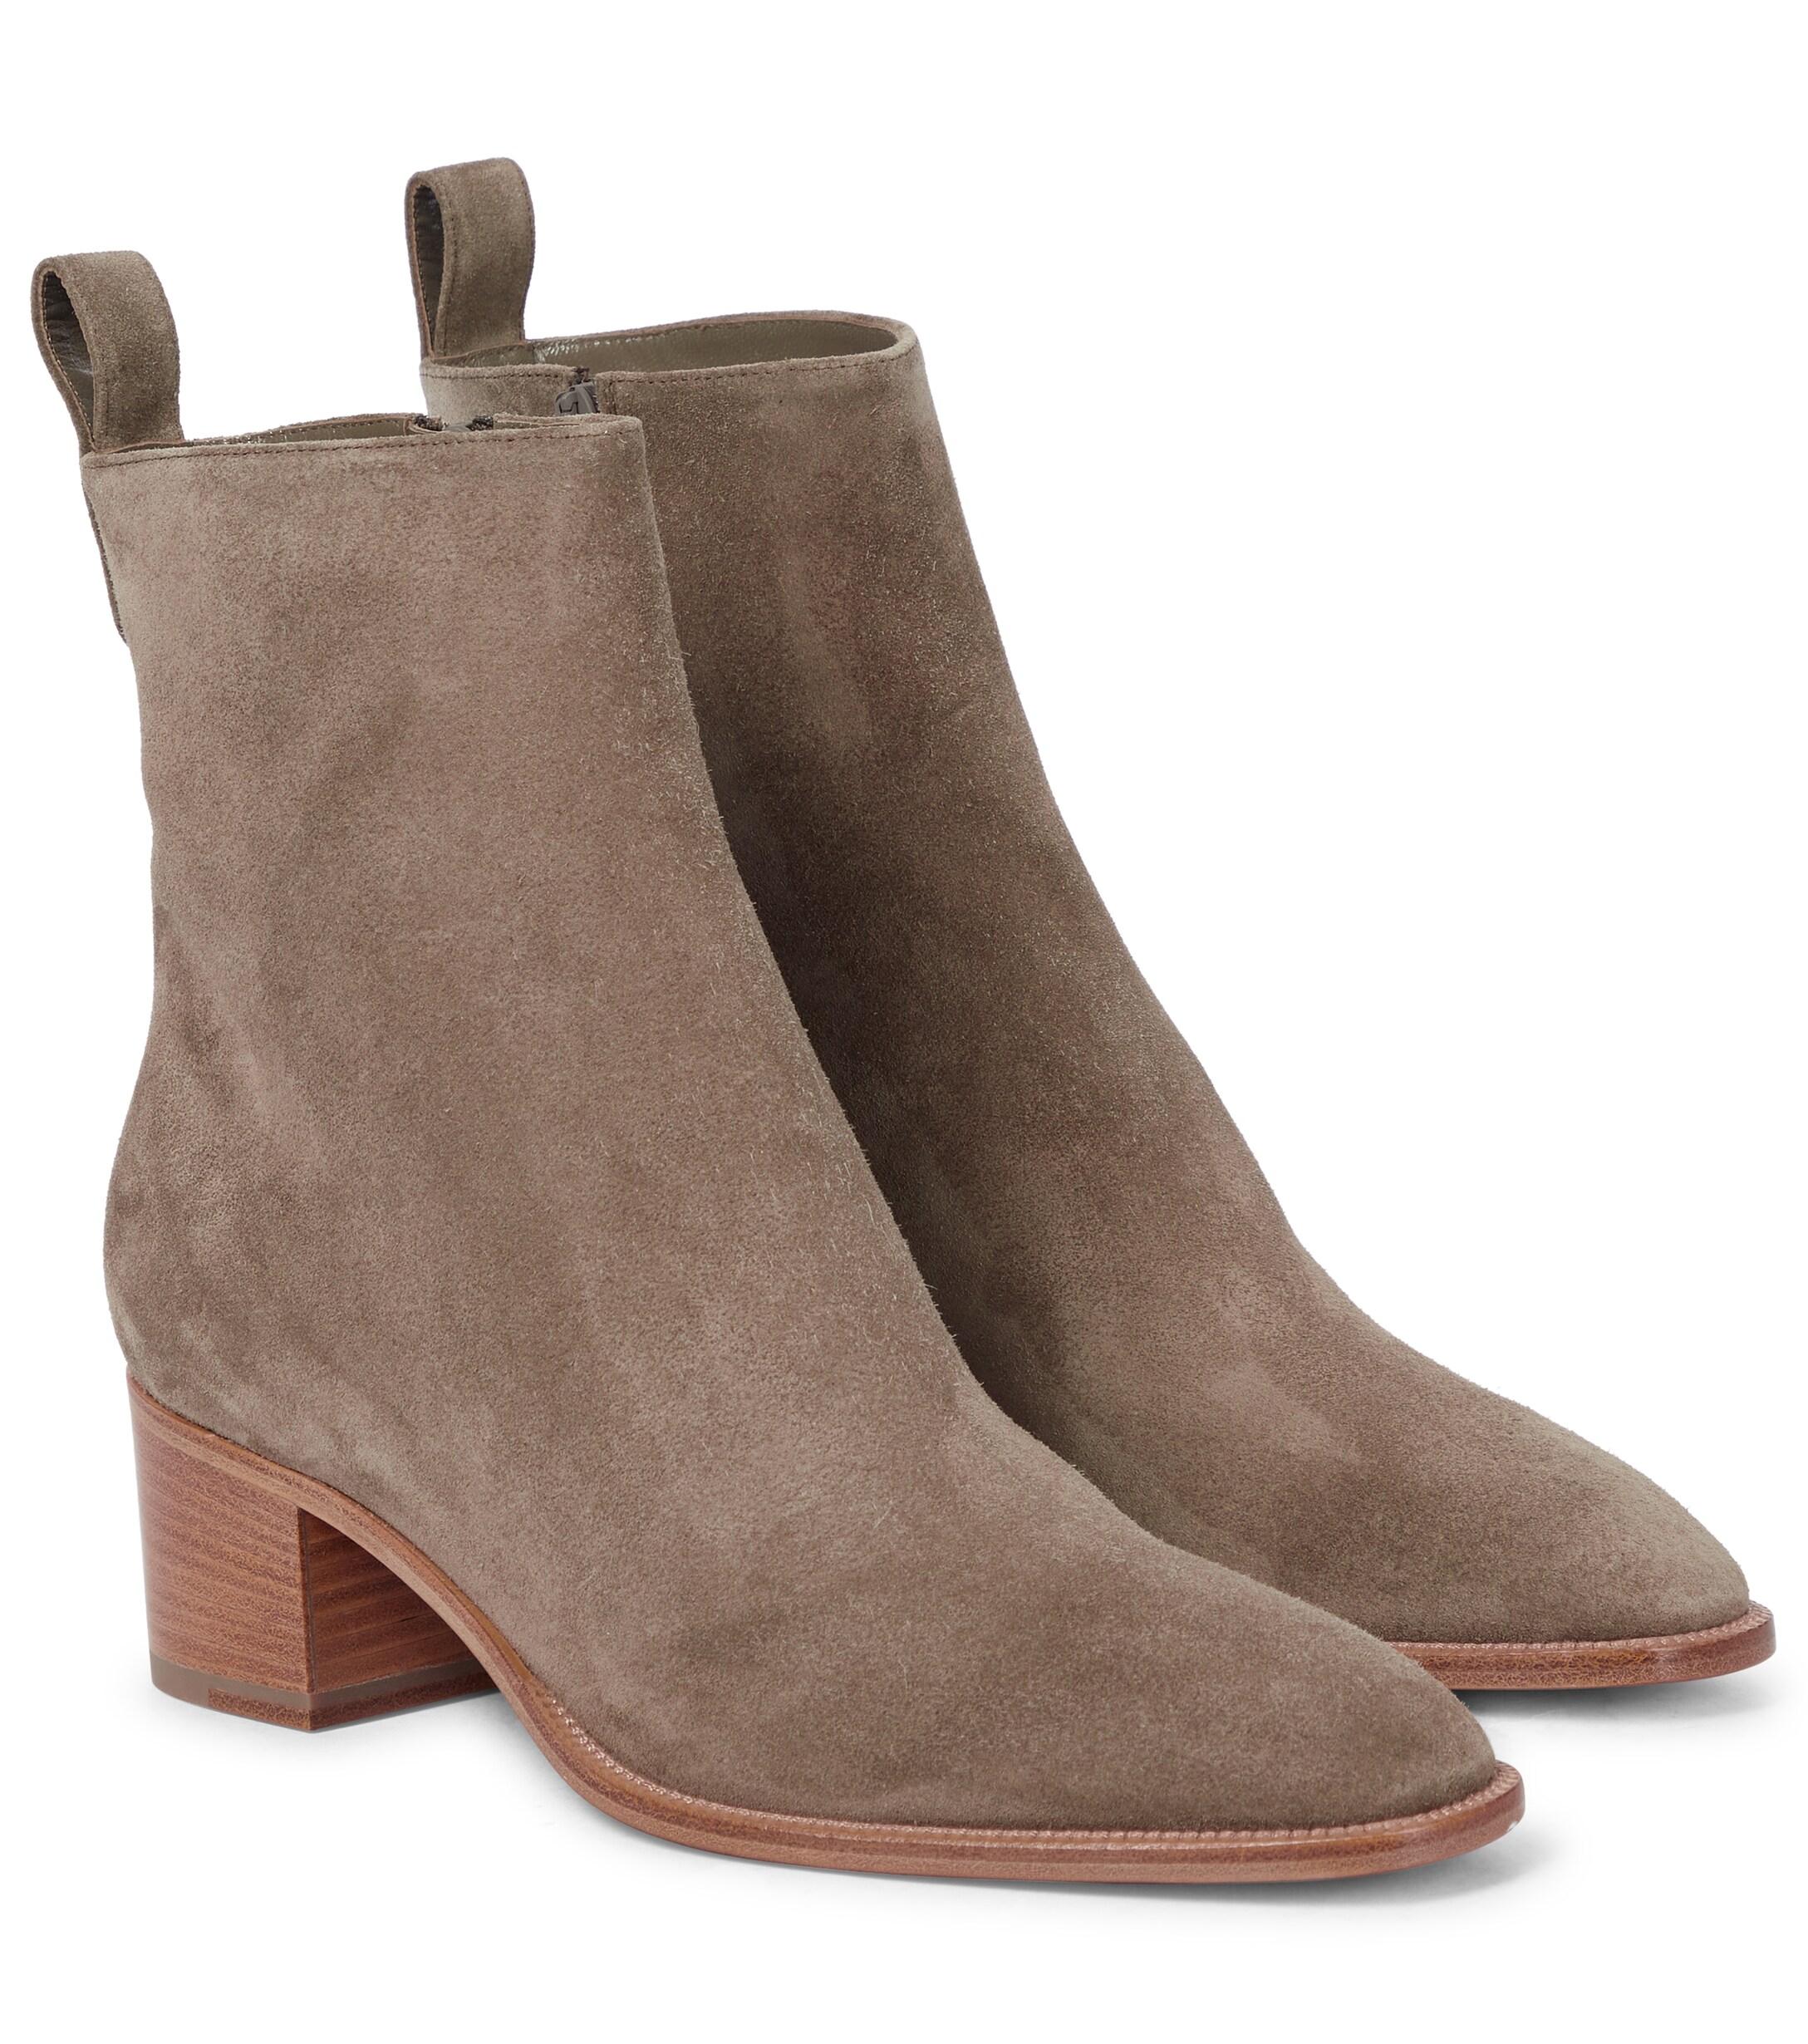 Christian Louboutin Antilop 55 Suede Ankle Boots in Beige (Natural 